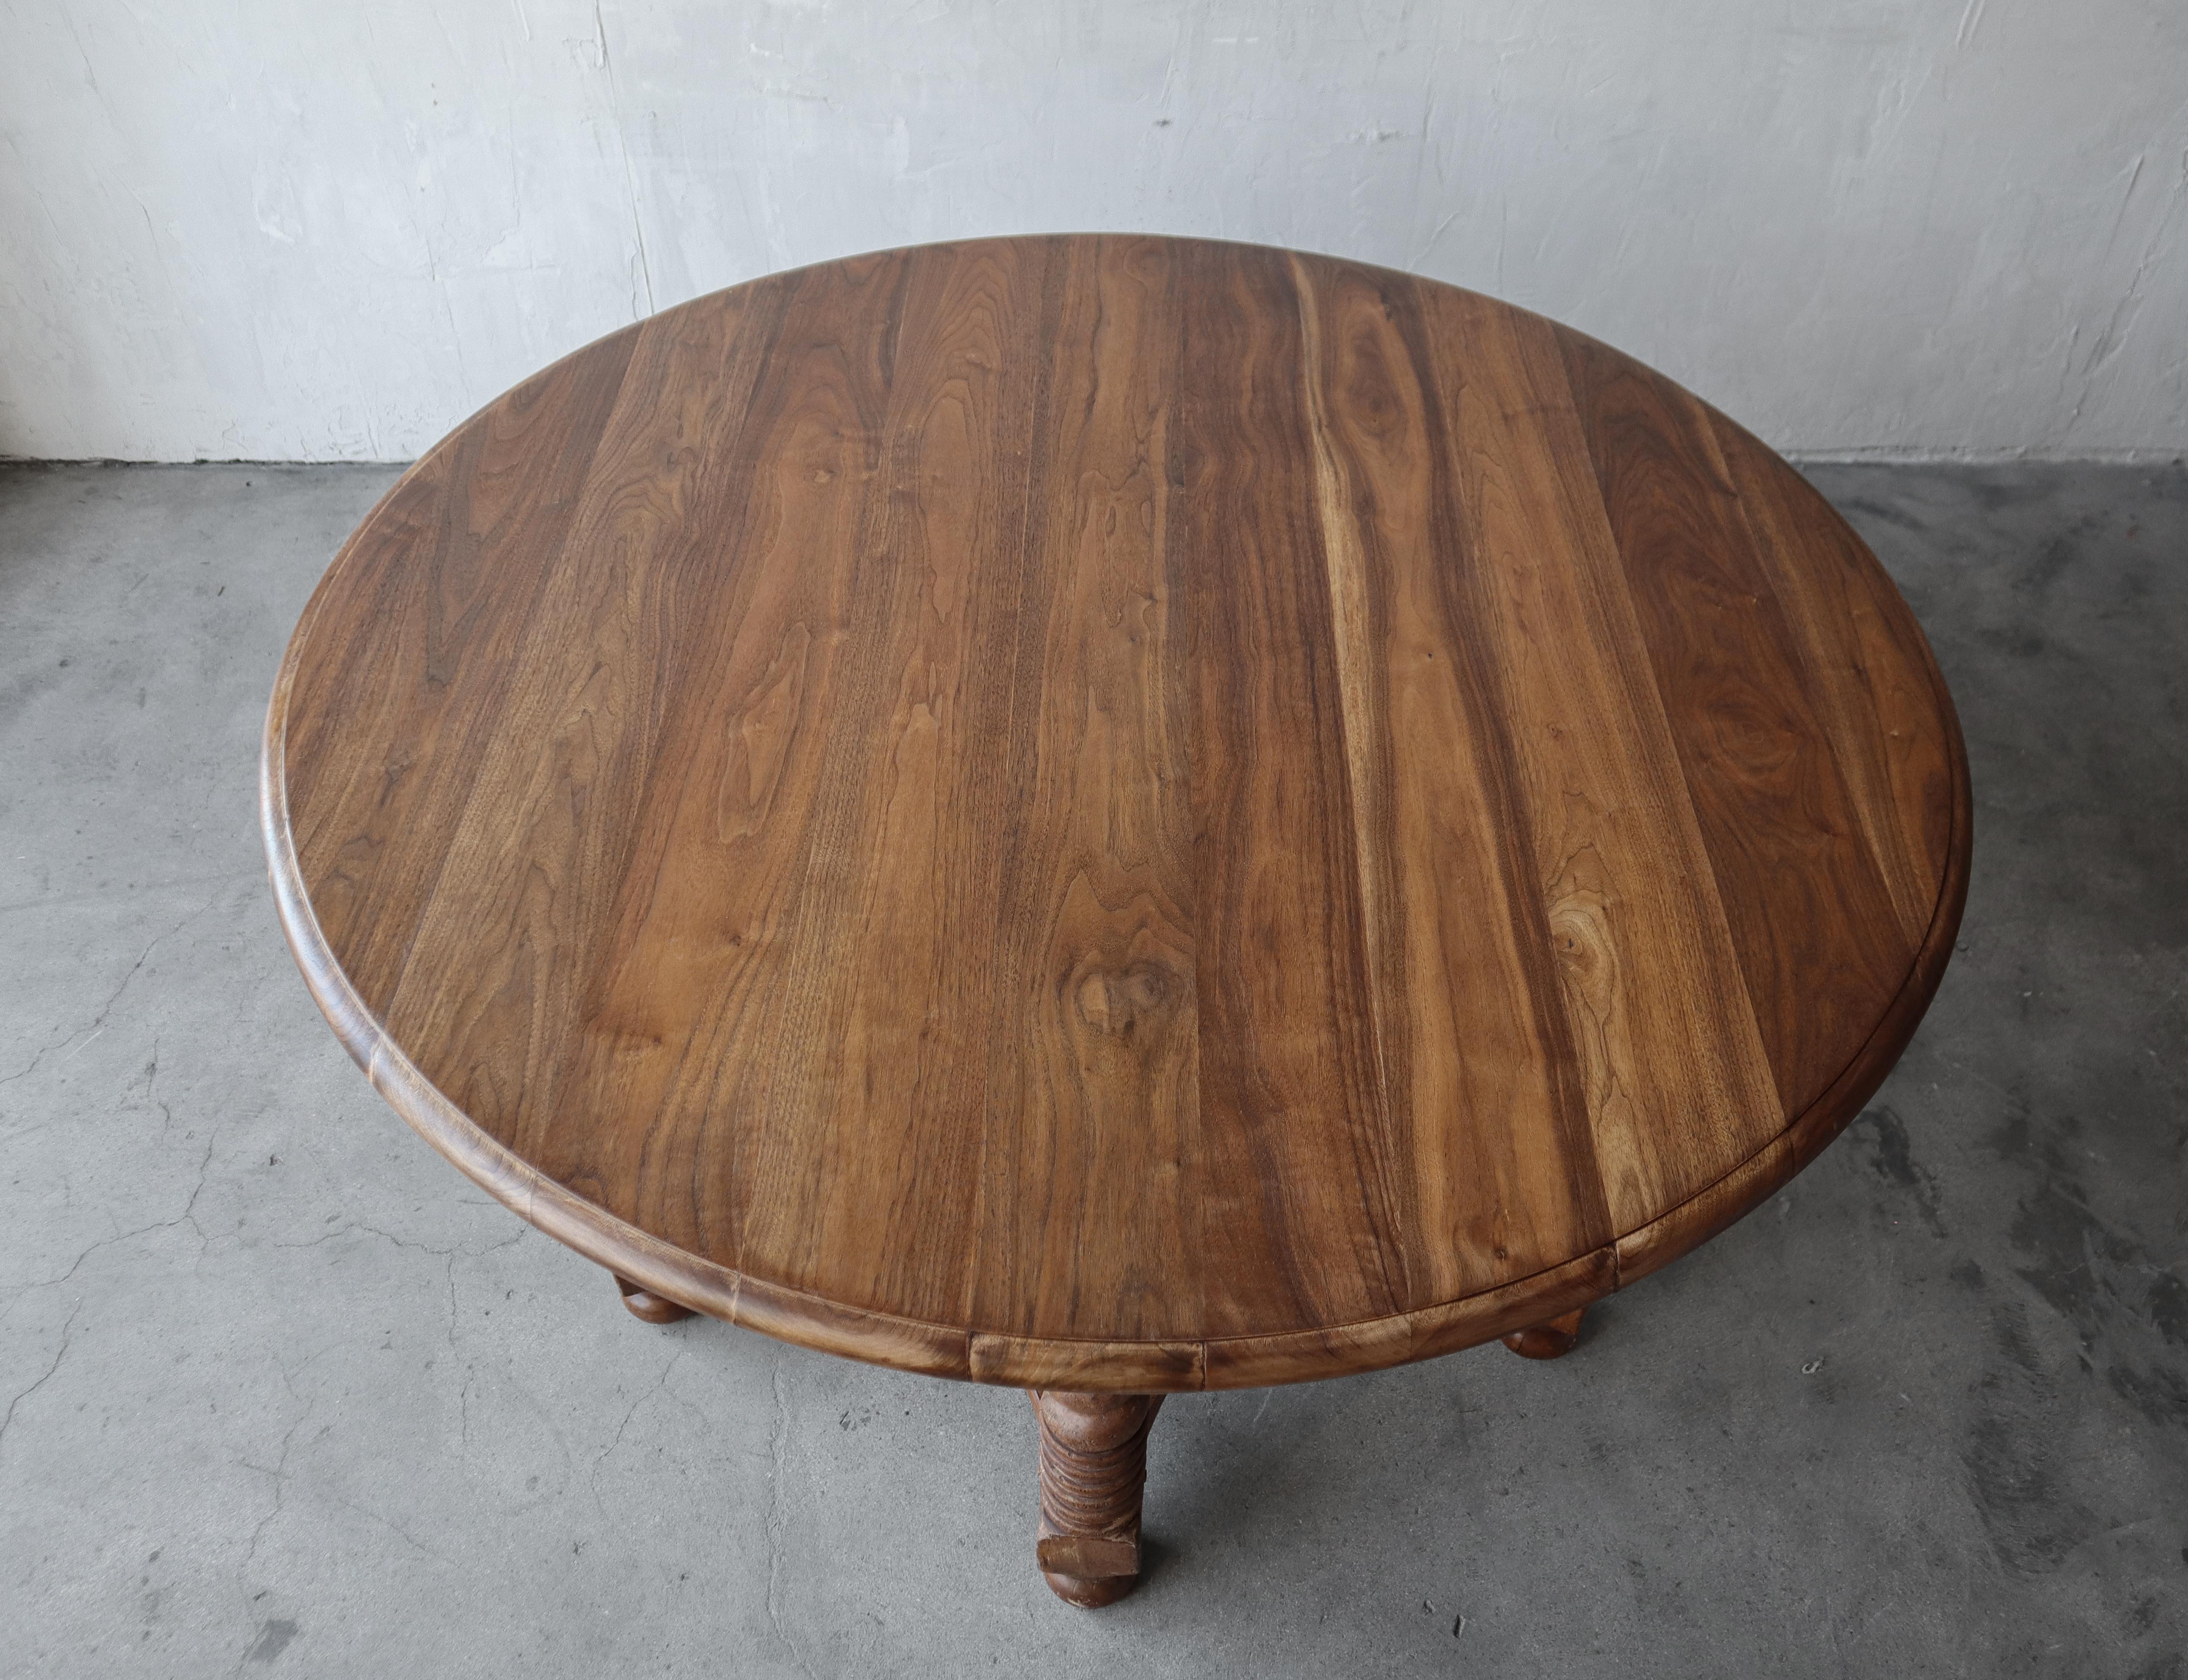 5ft Round European Walnut Barley Twist Dining Table In Good Condition For Sale In Las Vegas, NV